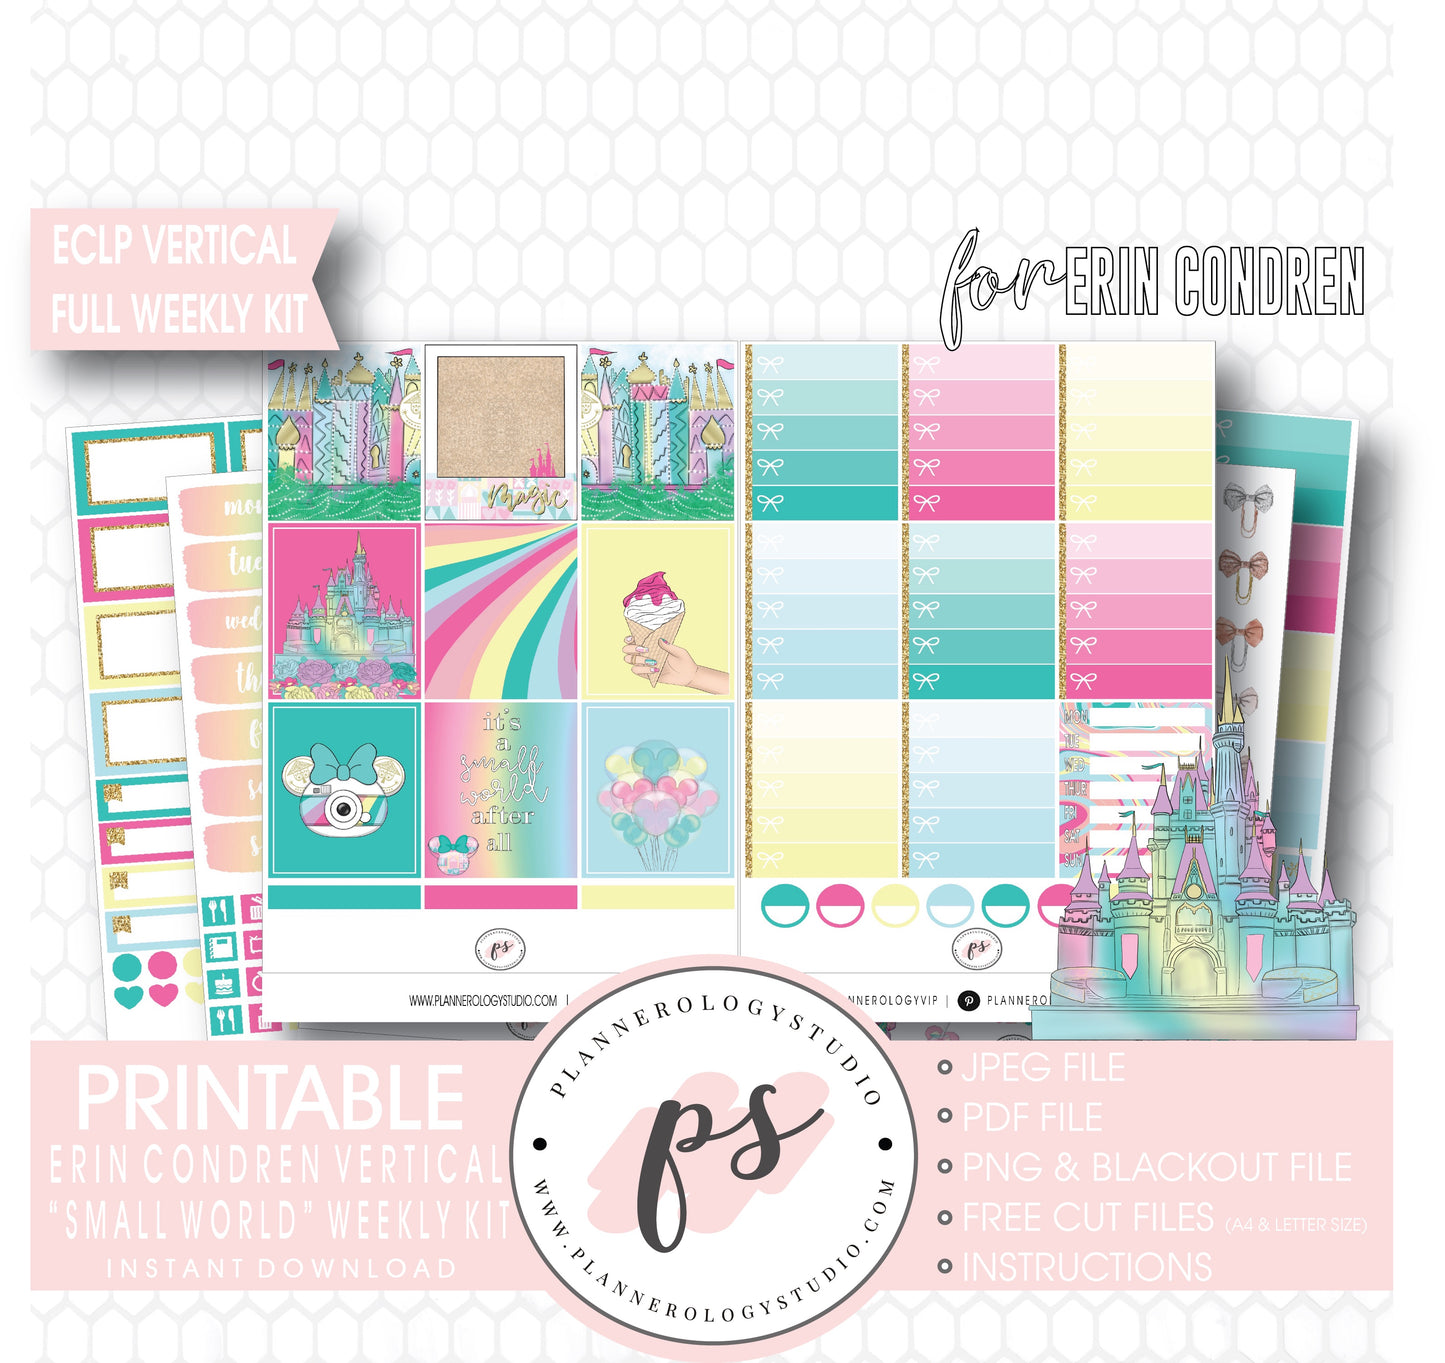 Small World (Disney Inspired) Full Weekly Kit Printable Planner Digital Stickers (for use with Erin Condren Vertical) - Plannerologystudio